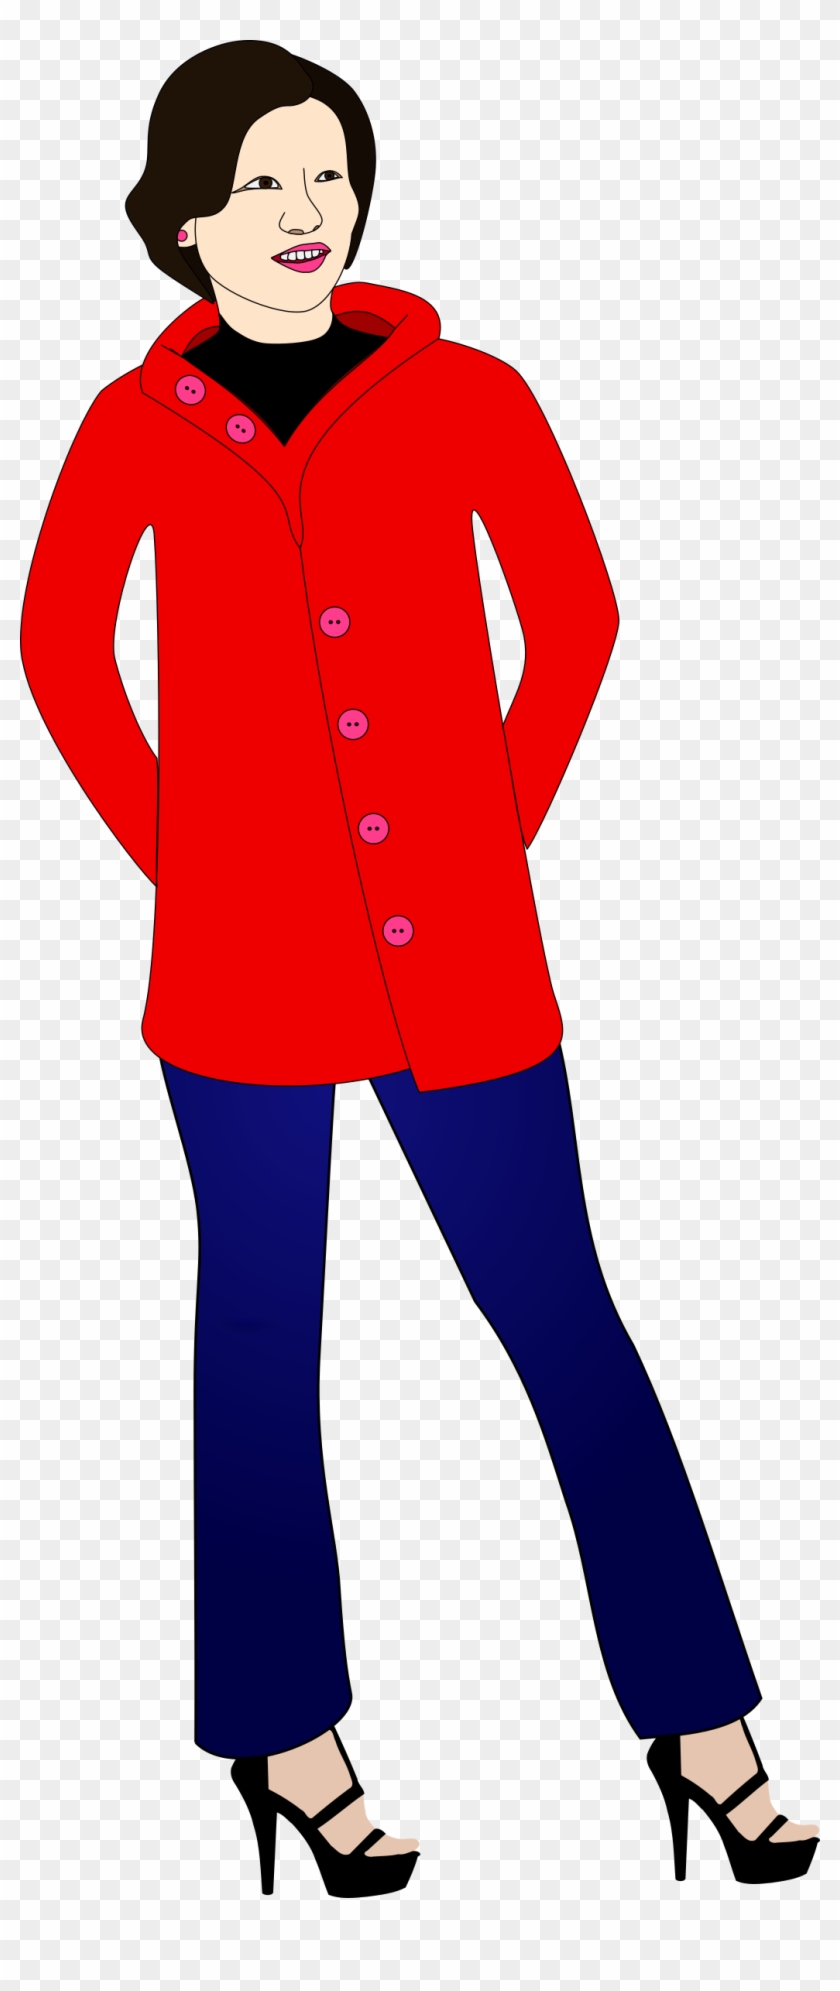 In Jeans, Heels, And A Red Coat - Woman #350176